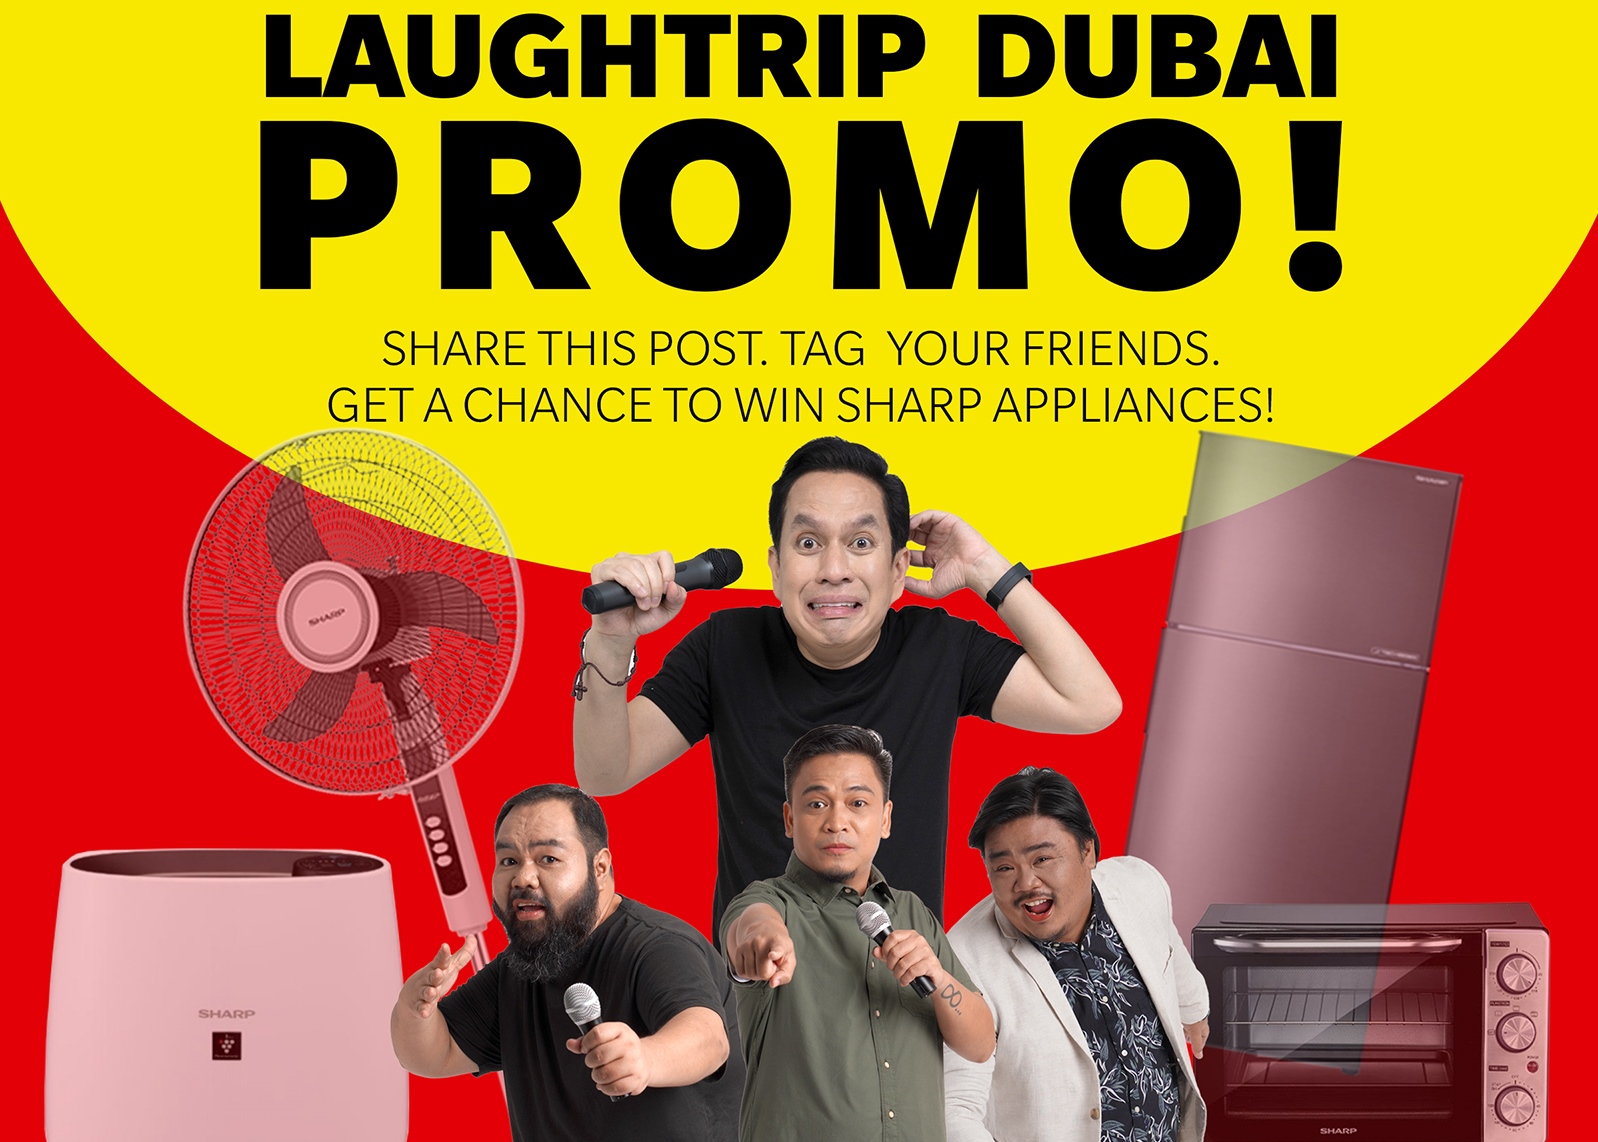 Laughtrip Dubai Promo of the best standup comedians in the Philippines